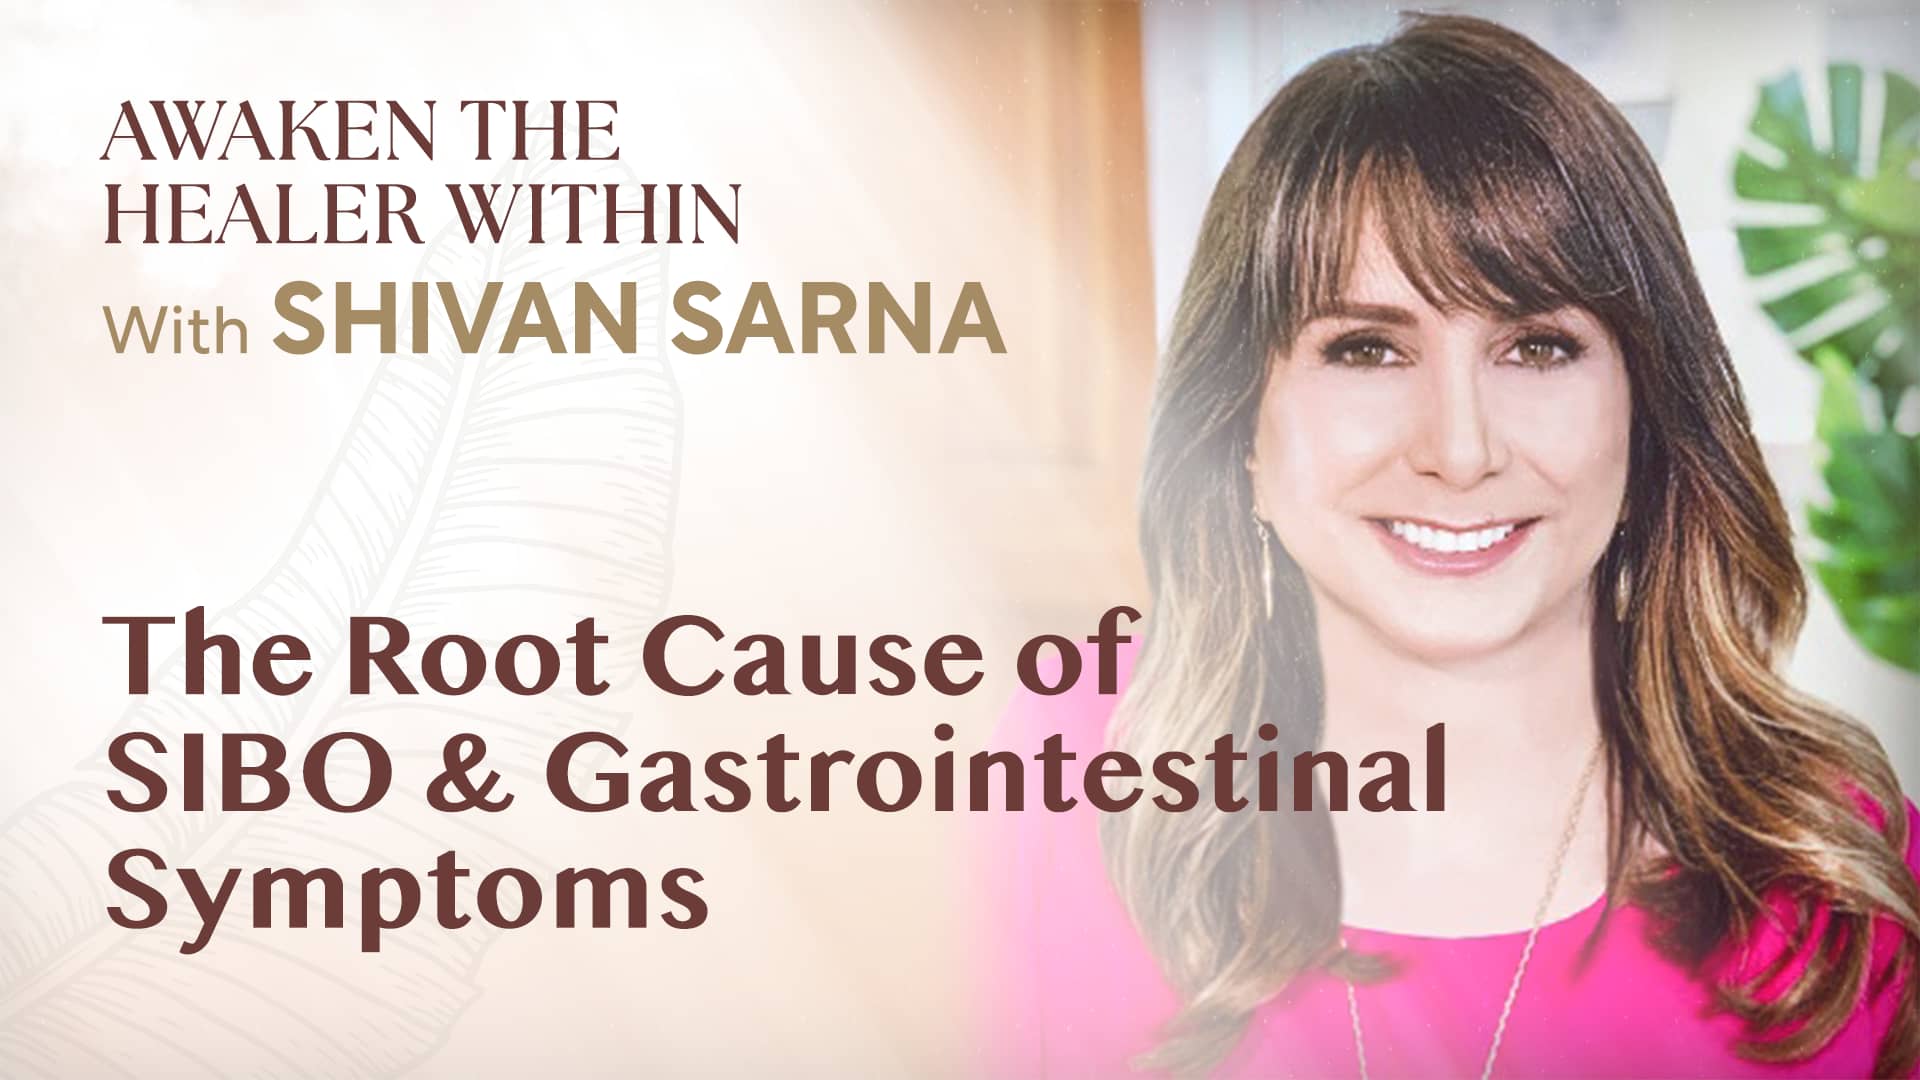 The Root Cause of SIBO & Gastrointestinal Symptoms